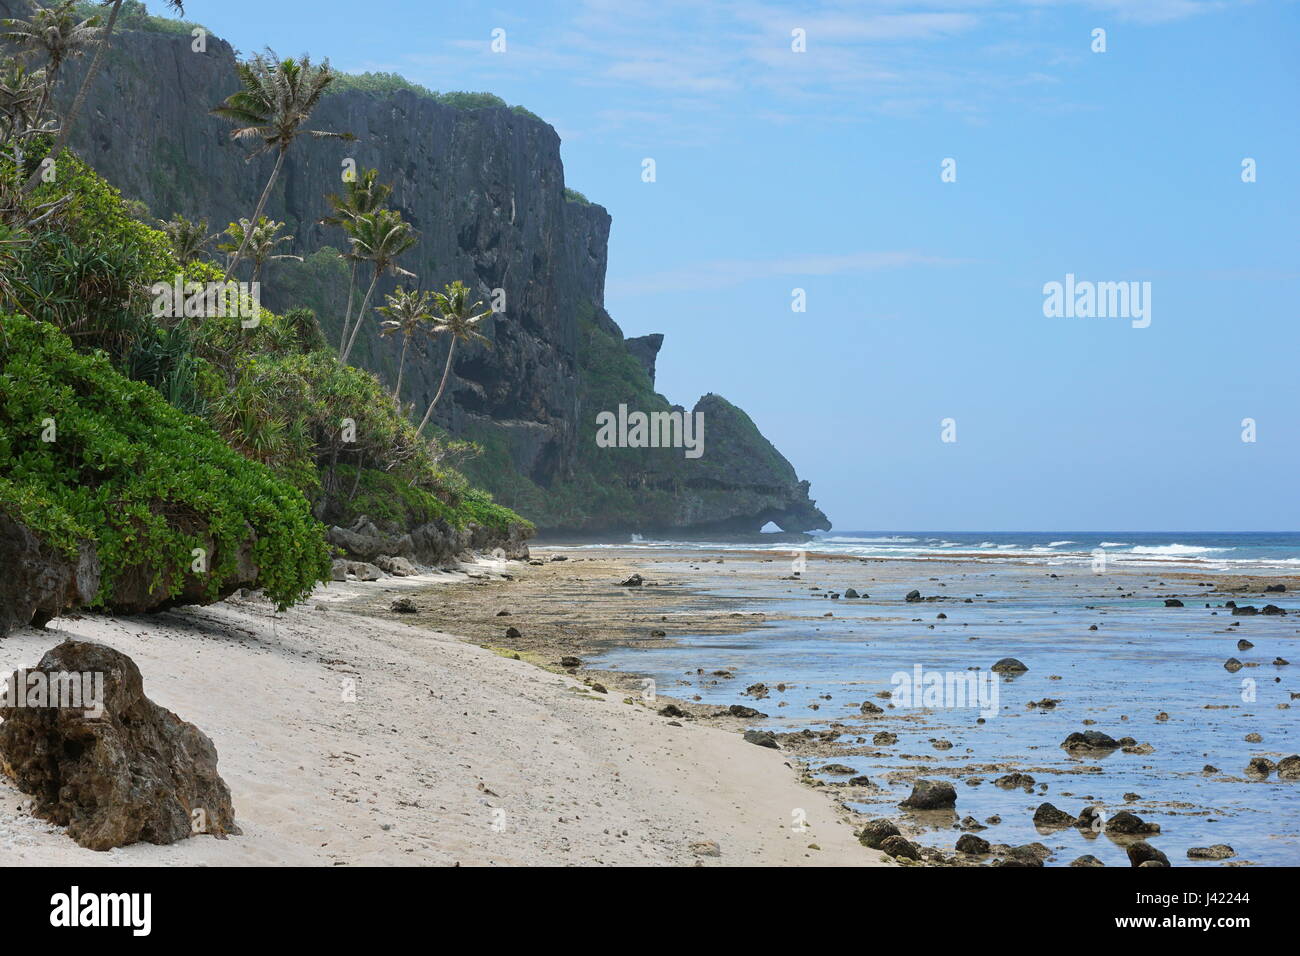 Rugged coastal landscape on the seashore of Rurutu island with eroded cliff and tropical vegetation, Pacific ocean, Austral, French Polynesia Stock Photo